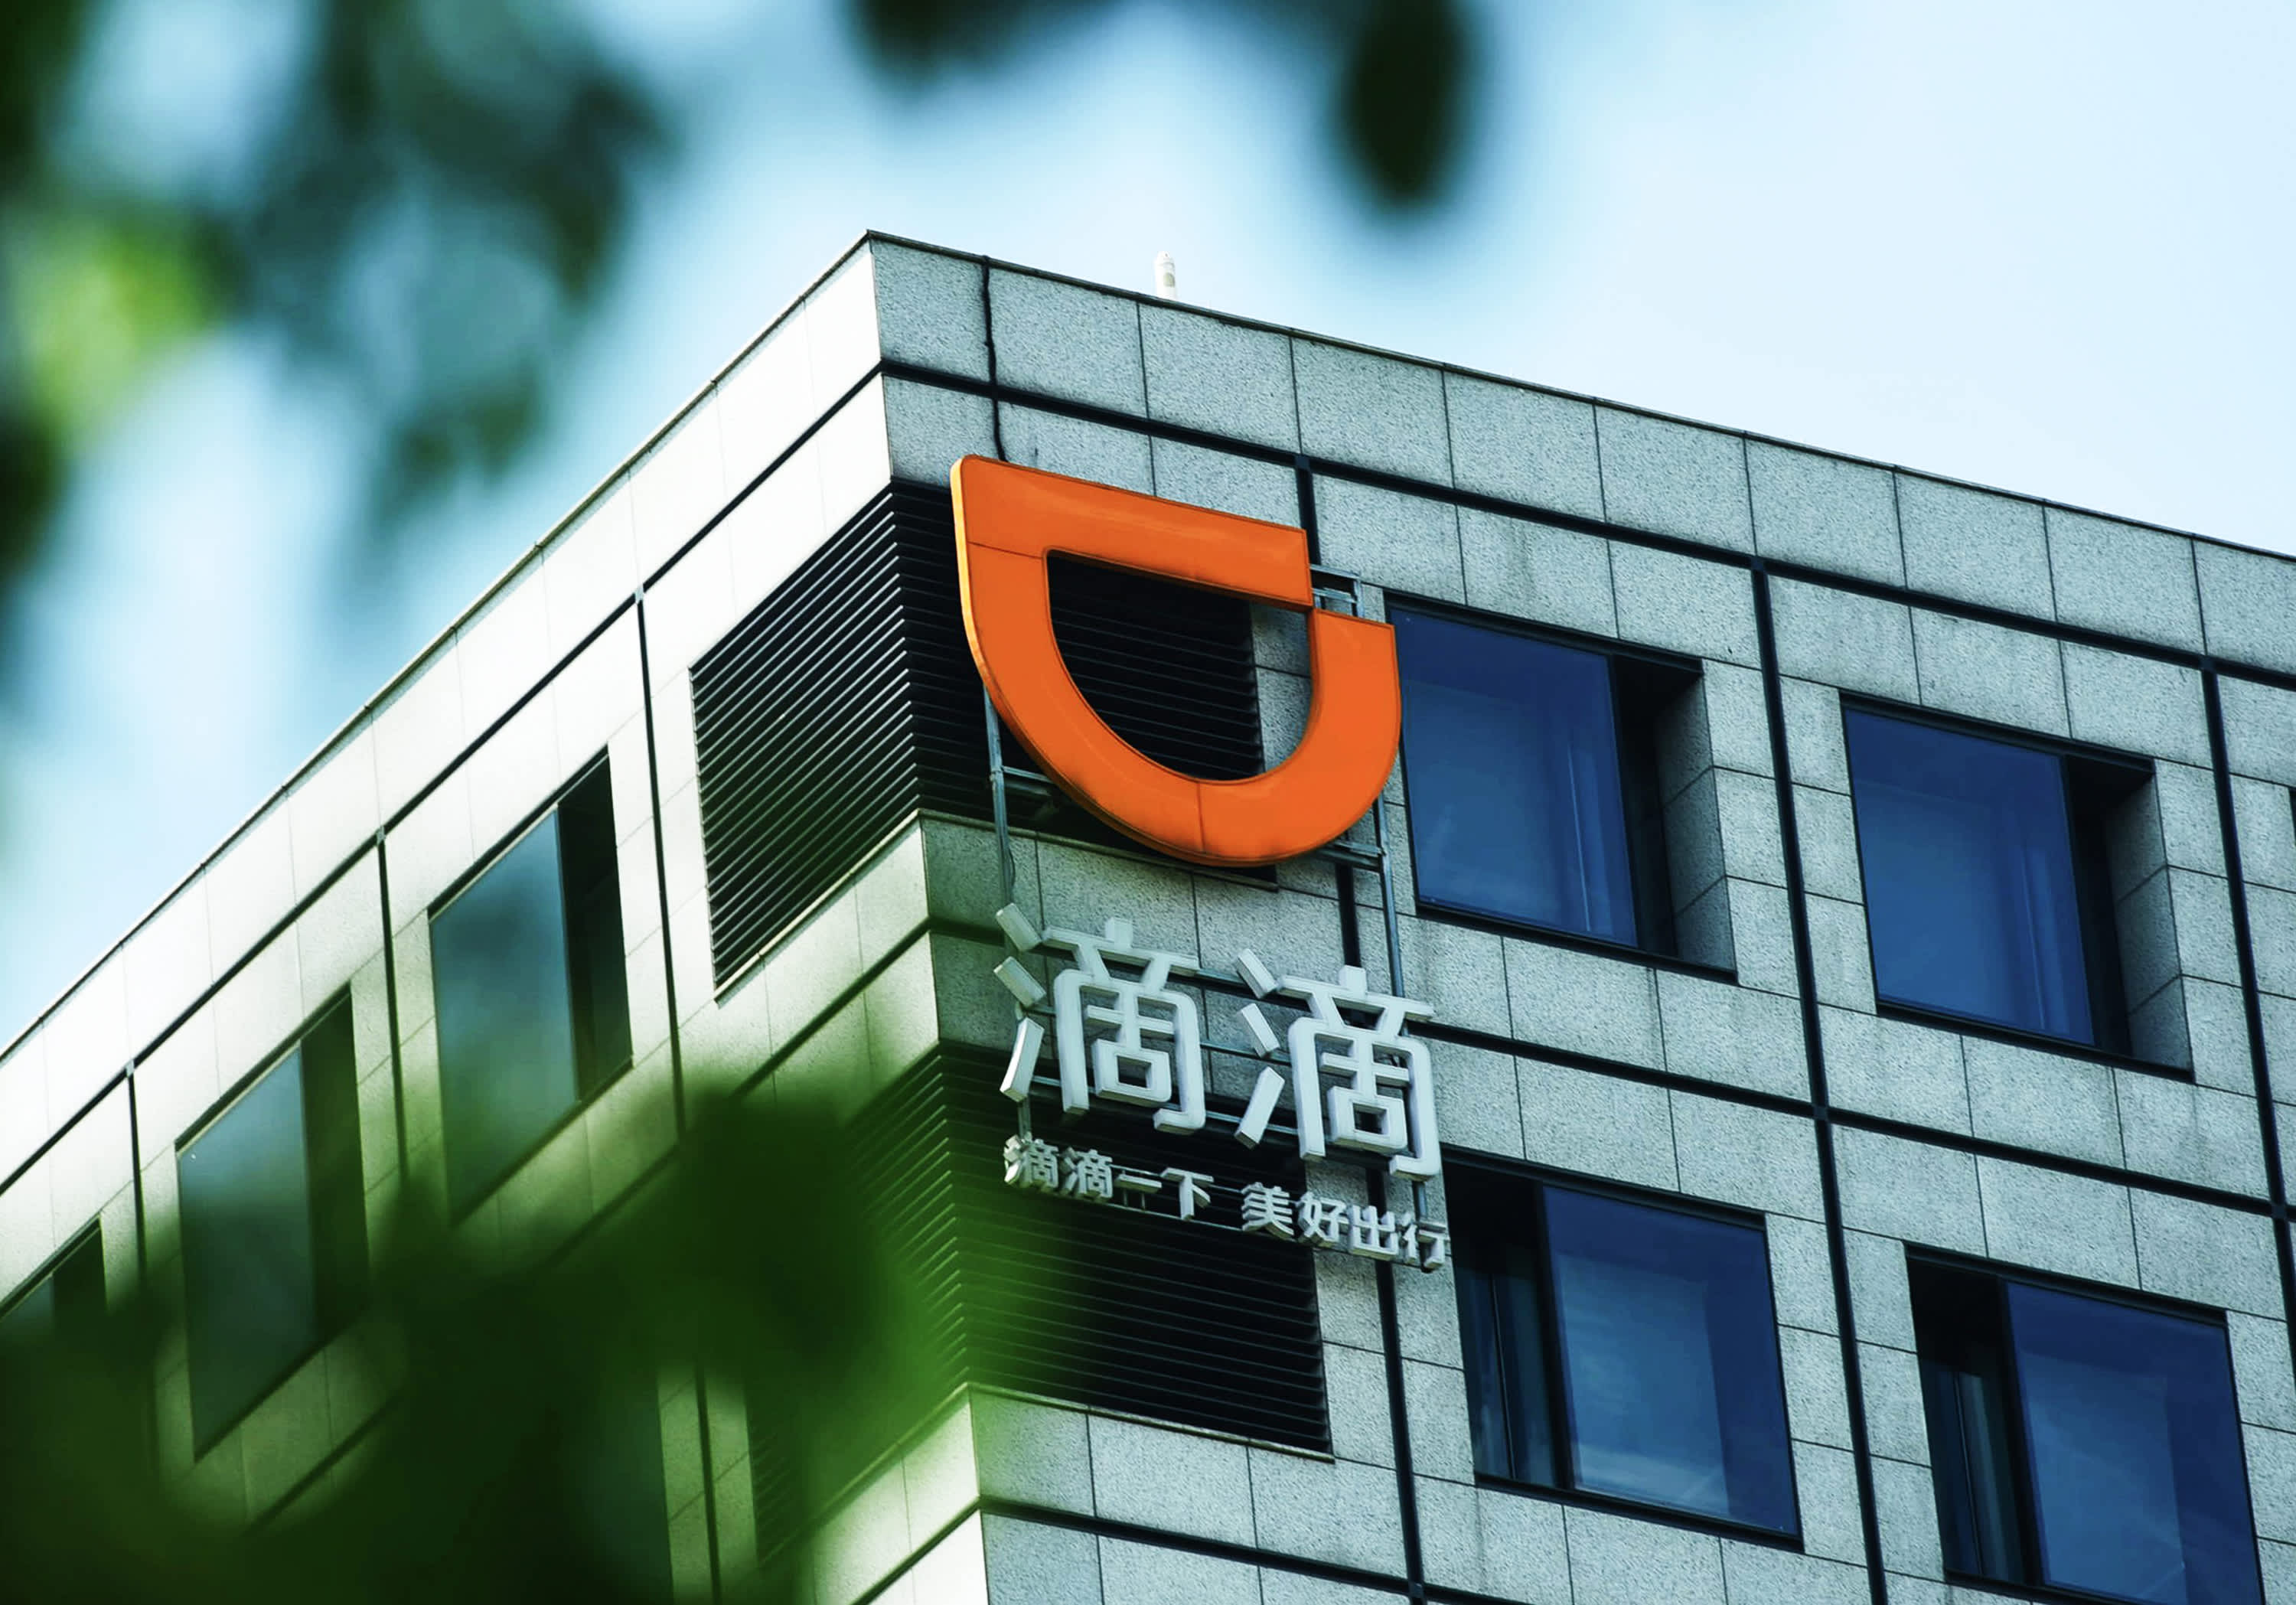 Didi Chuxing raised $ 1.5 billion in debt before IPO: Reports